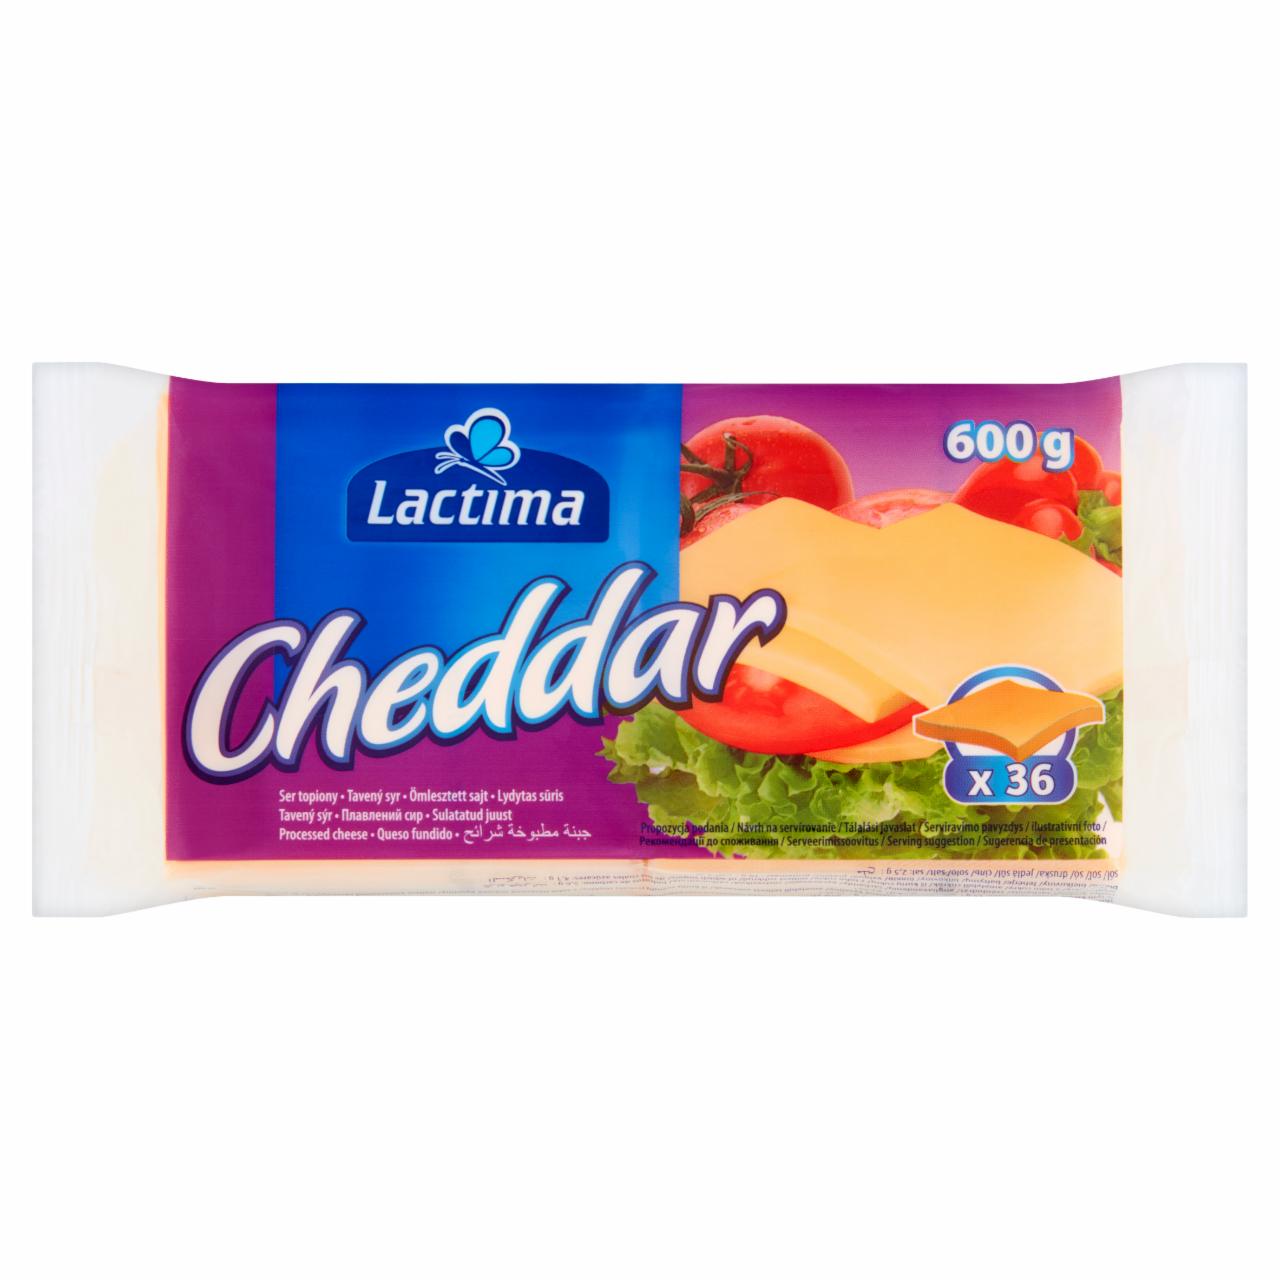 Photo - Lactima Cheddar Processed Cheese Slices 600 g (36 x 16.67 g)